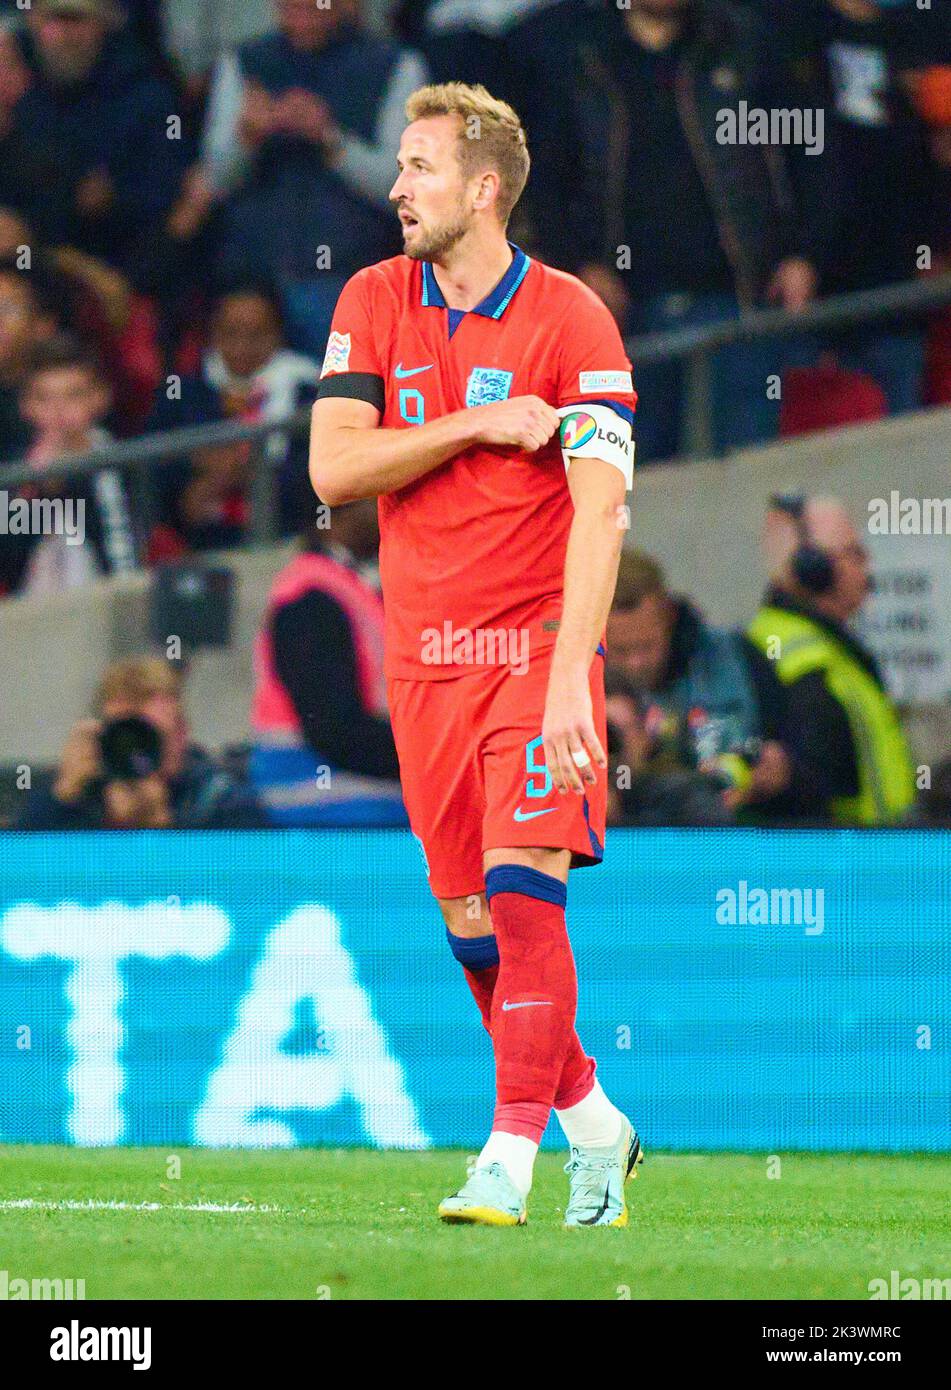 Harry KANE, England 9  with captain's armband with LGBTIQ, LBGT,  in the UEFA Nations League 2022 match  ENGLAND - GERMANY 3-3  in Season 2022/2023 on Sept 26, 2022  in London, Great Britain.  © Peter Schatz / Alamy Live News Stock Photo